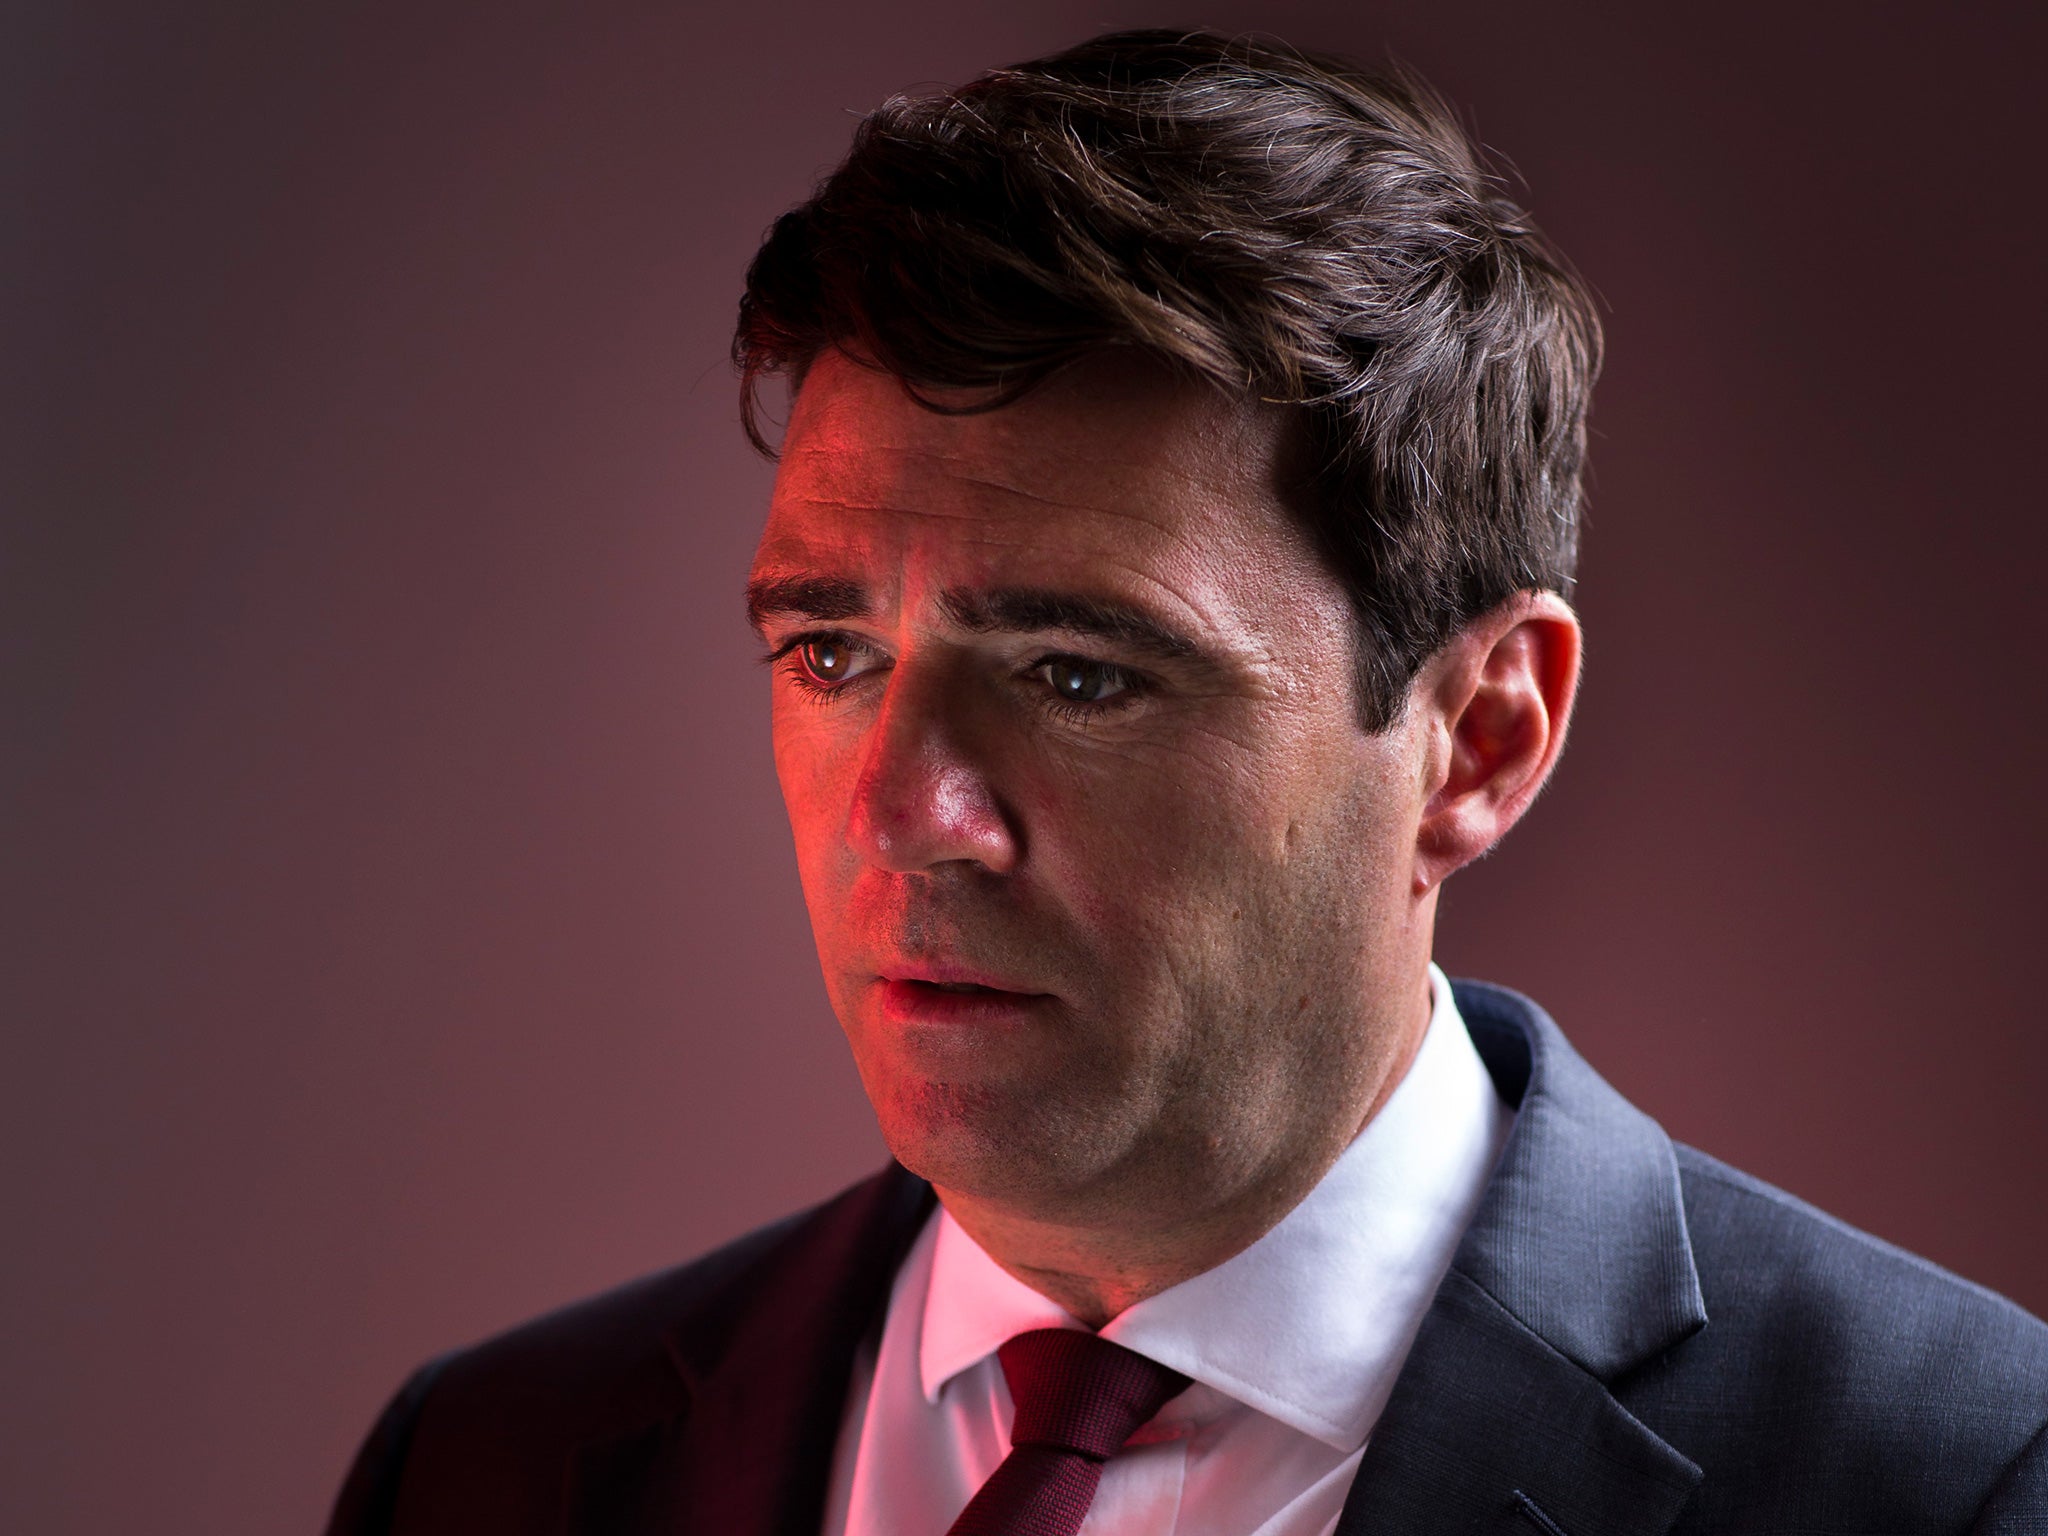 Andy Burnham has announced that he will run for Mayor of Manchester